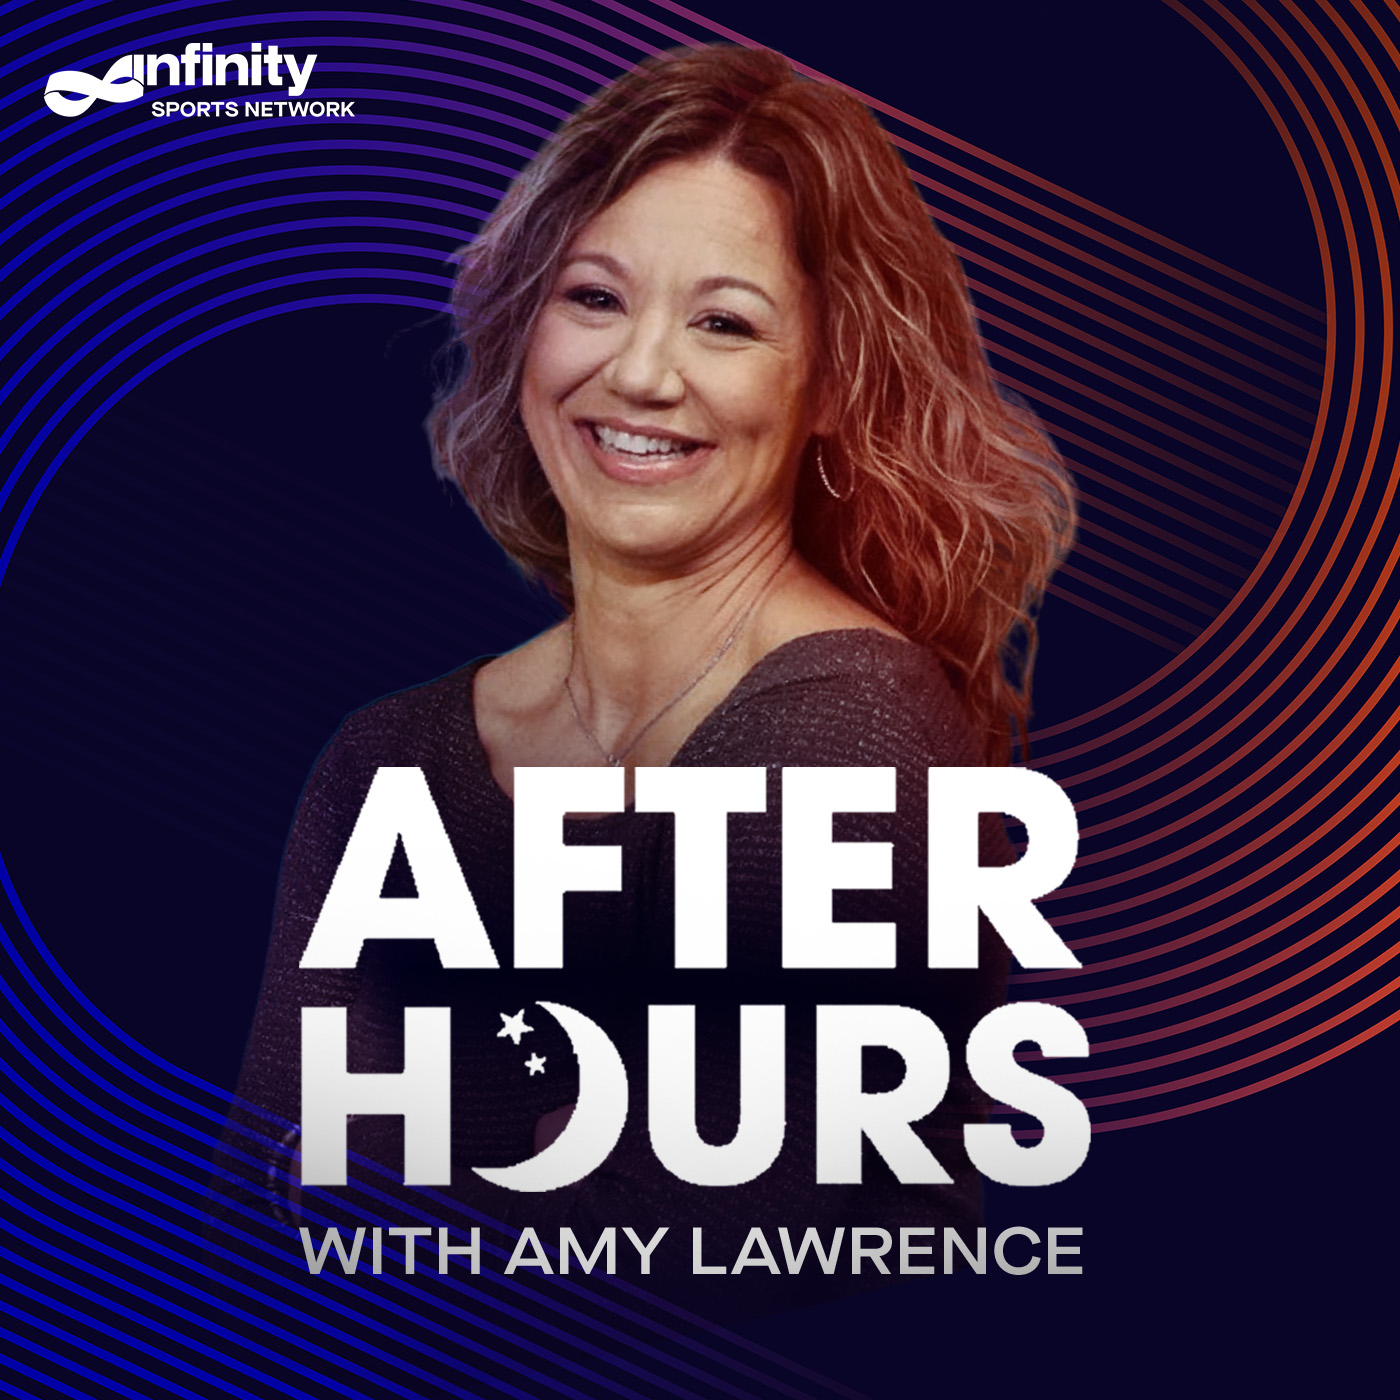 8-25-21 After Hours with Amy Lawrence PODCAST: Hour 3